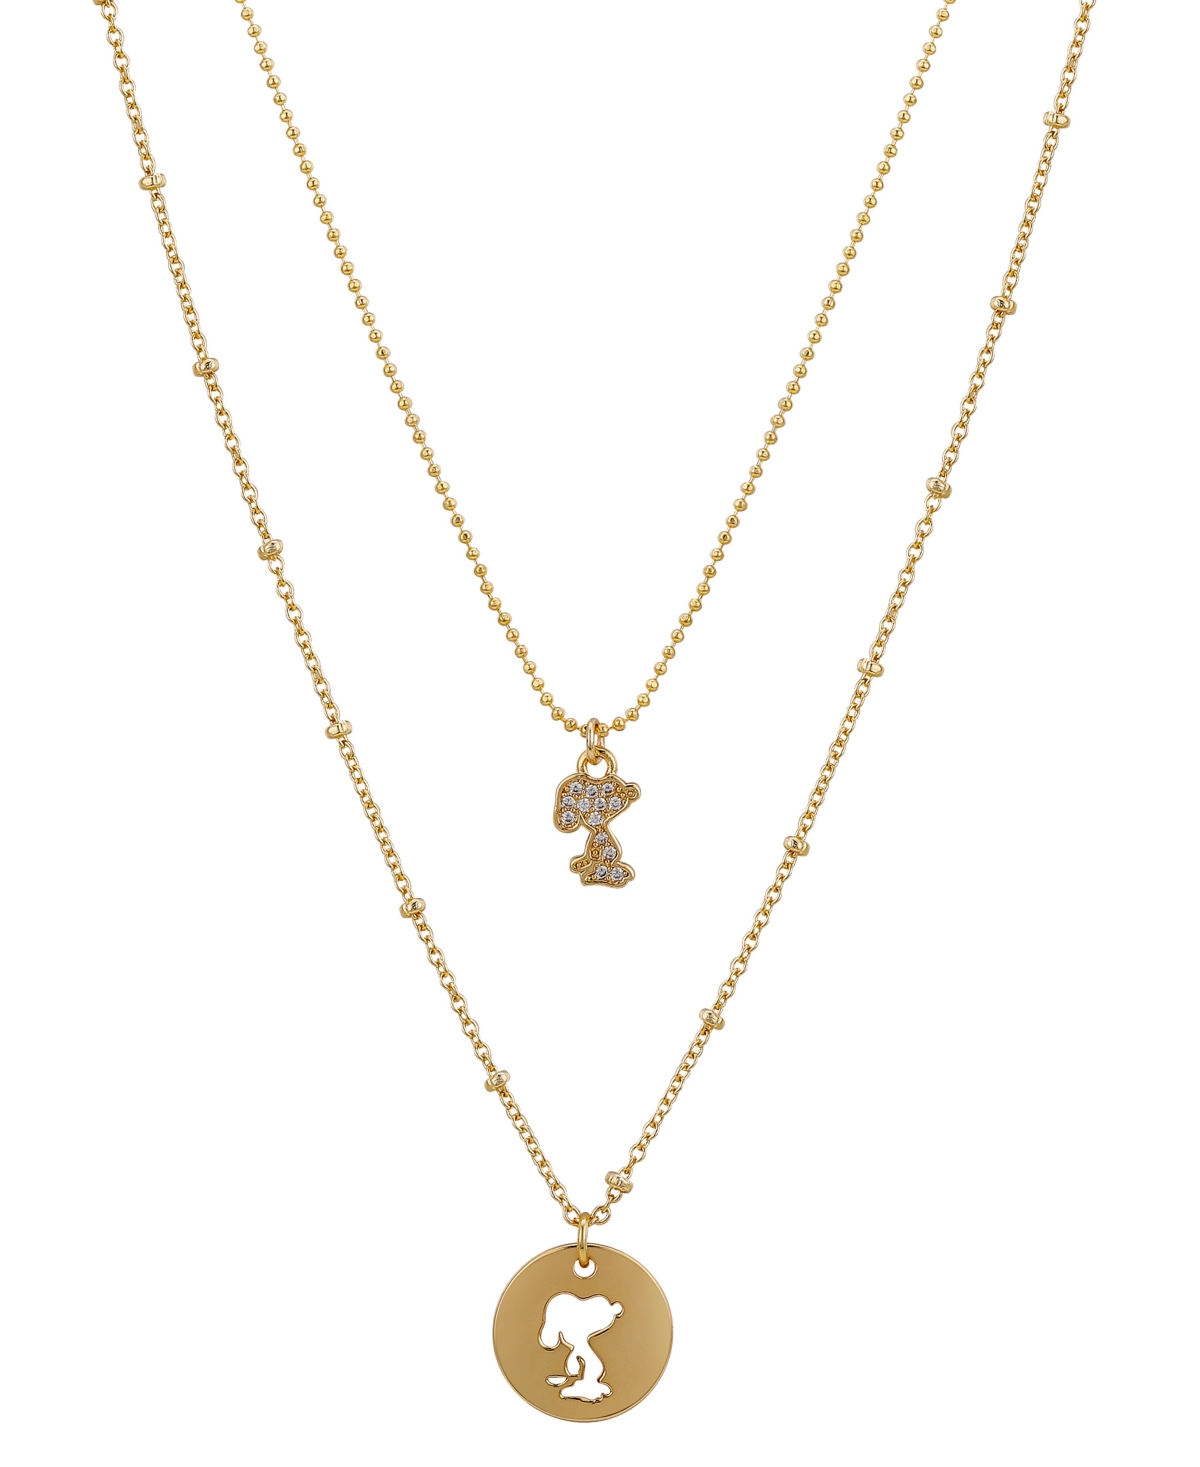 Unwritten Peanuts Jewelry: 2-Pc 16" Snoopy Cubic Zirconia Necklace Set $15, 8-1/4" Adjustable Bangle Bracelet w/ Silver Plated Charms $16.50 & More + Free Shipping on $25+